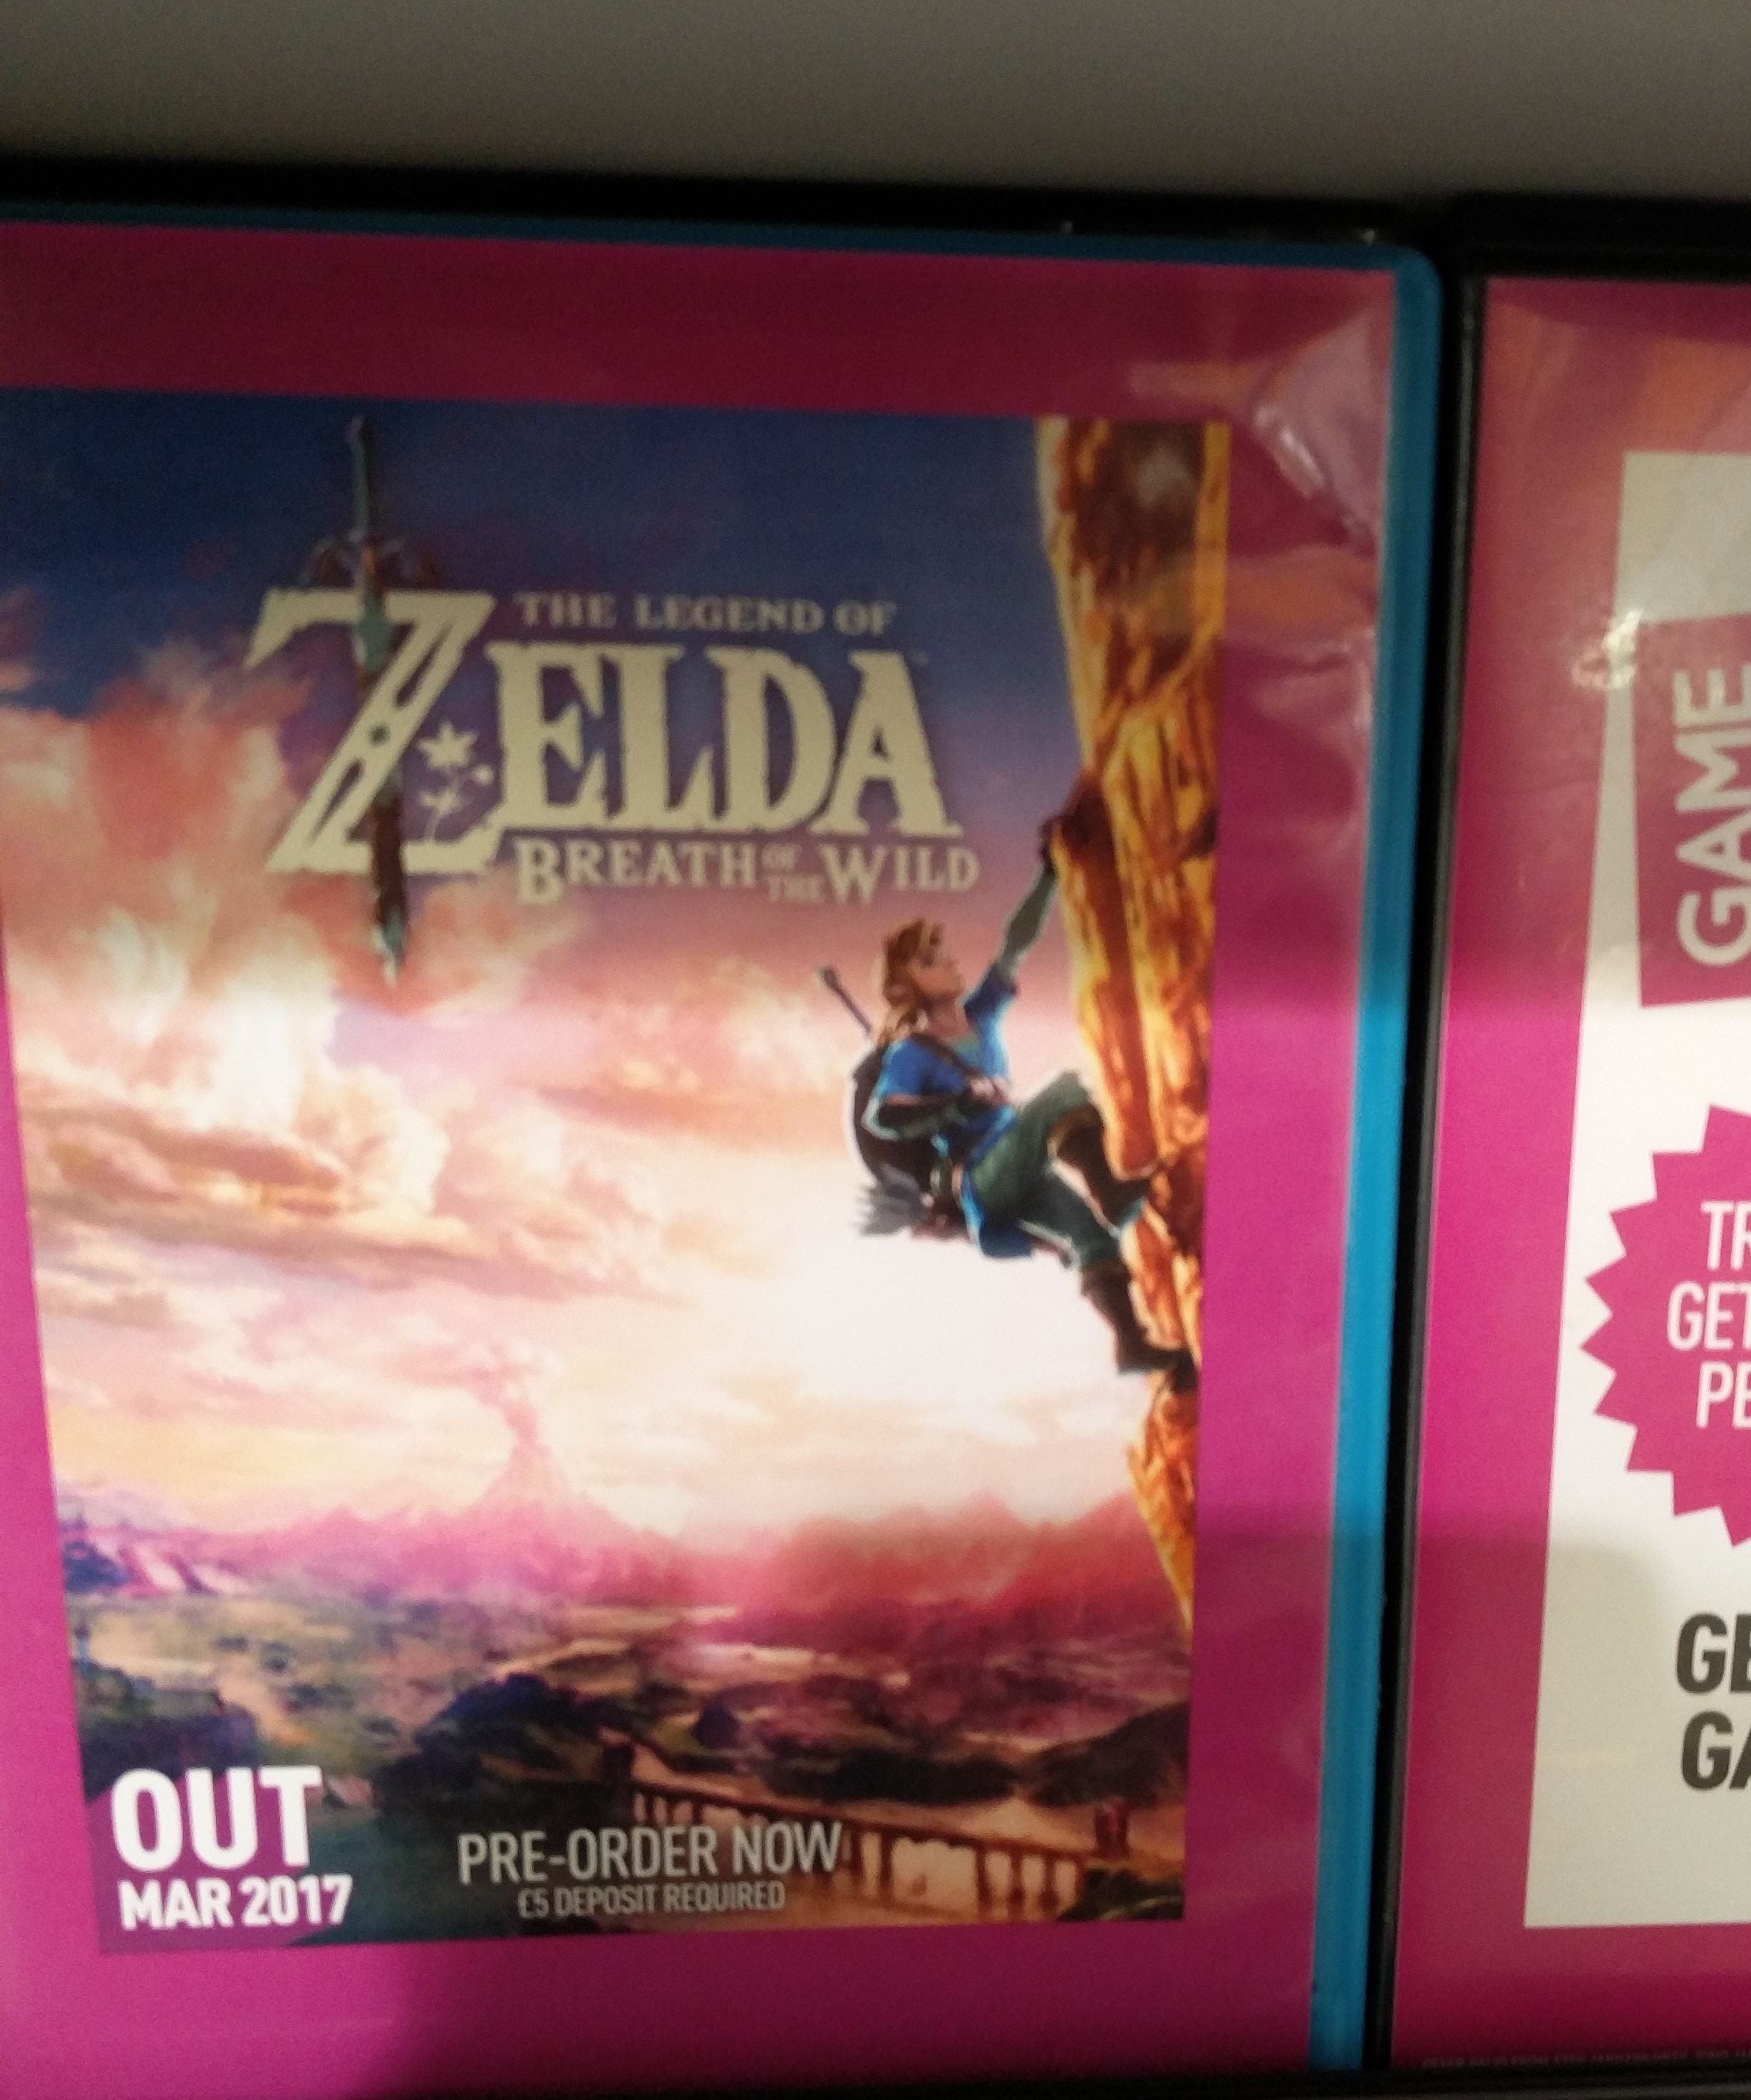 Image for Zelda: Breath of the Wild is out in March, according to GAME